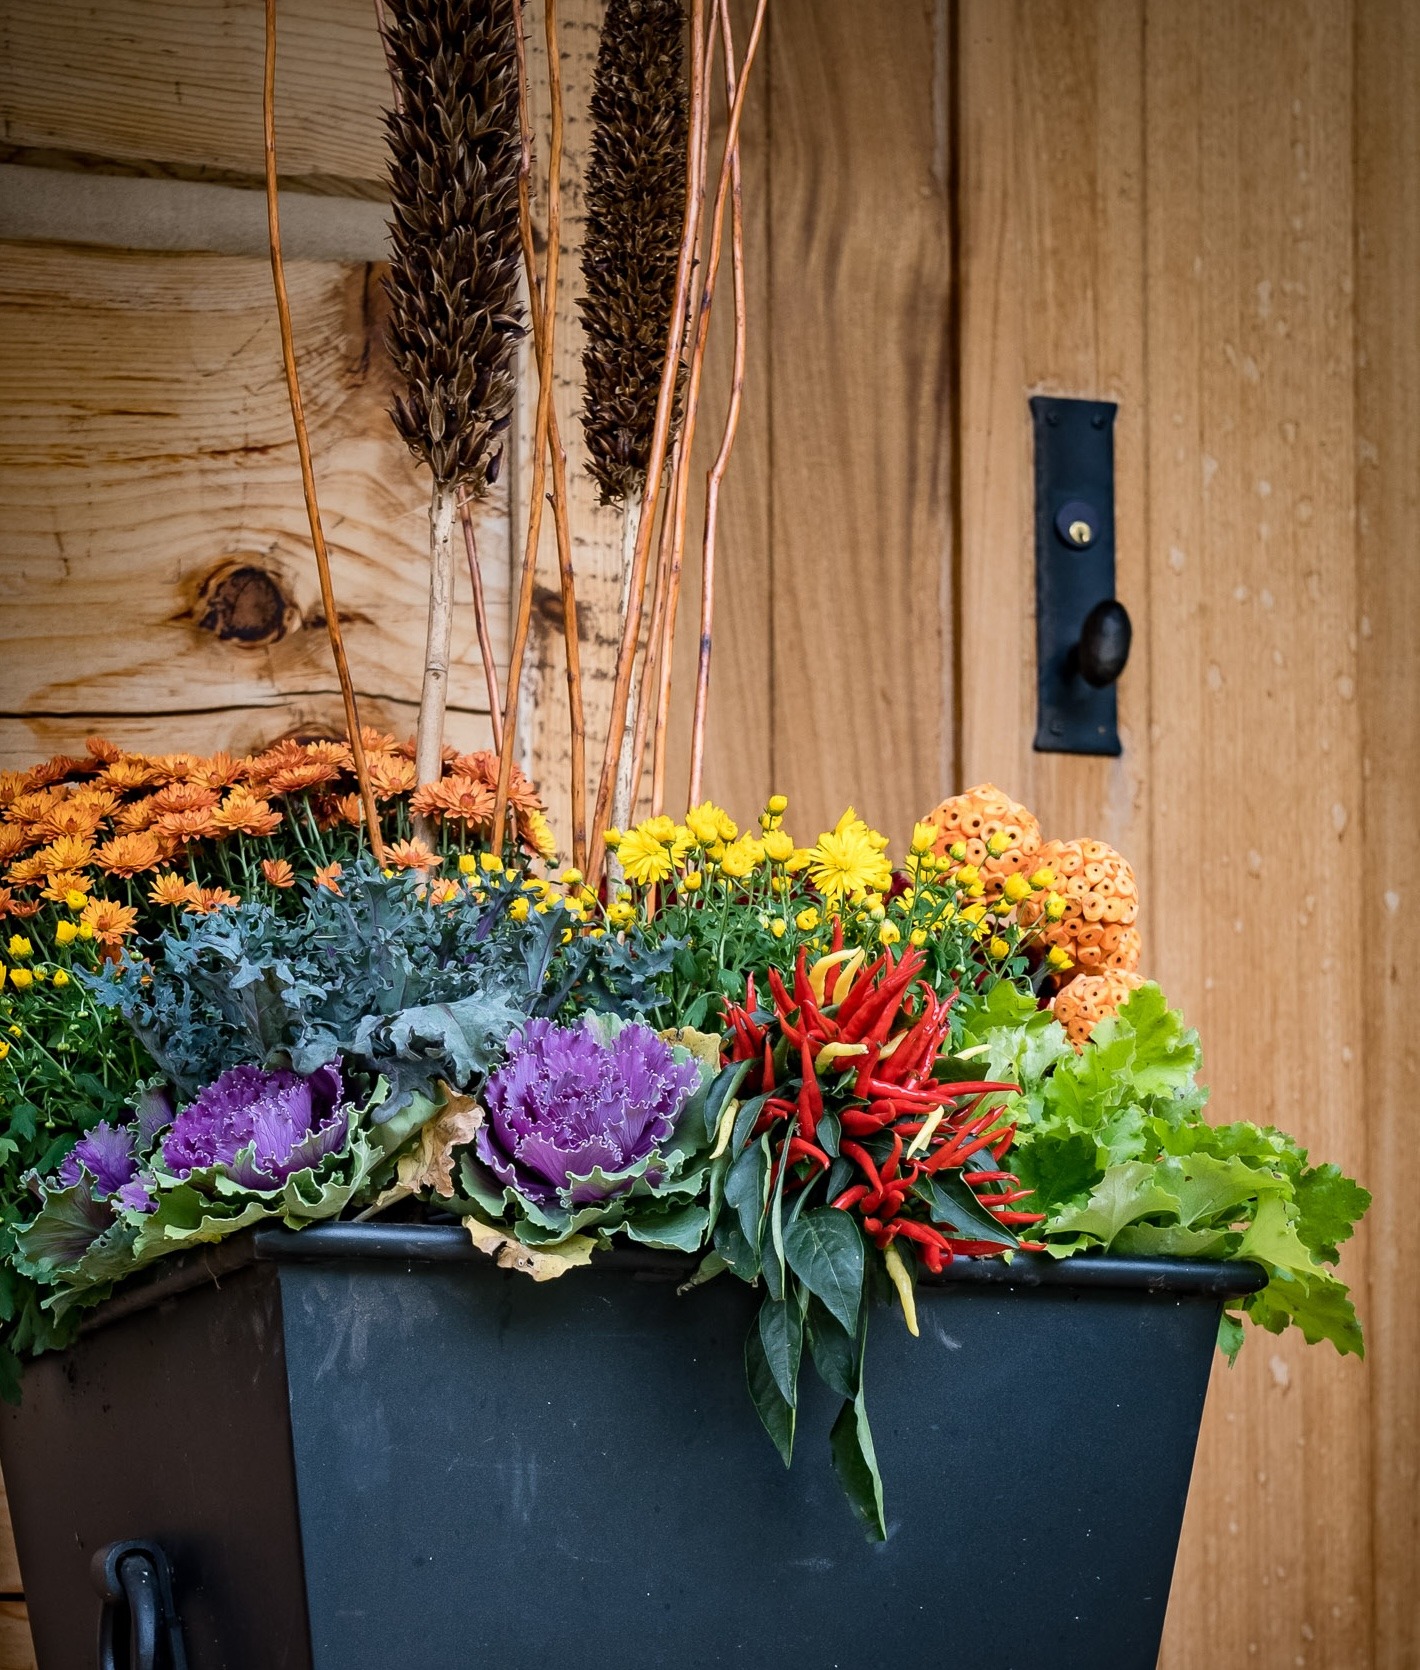 A vibrant planter filled with assorted flowers, ornamental cabbages, and red chili peppers against a wooden background with tall dried plants.